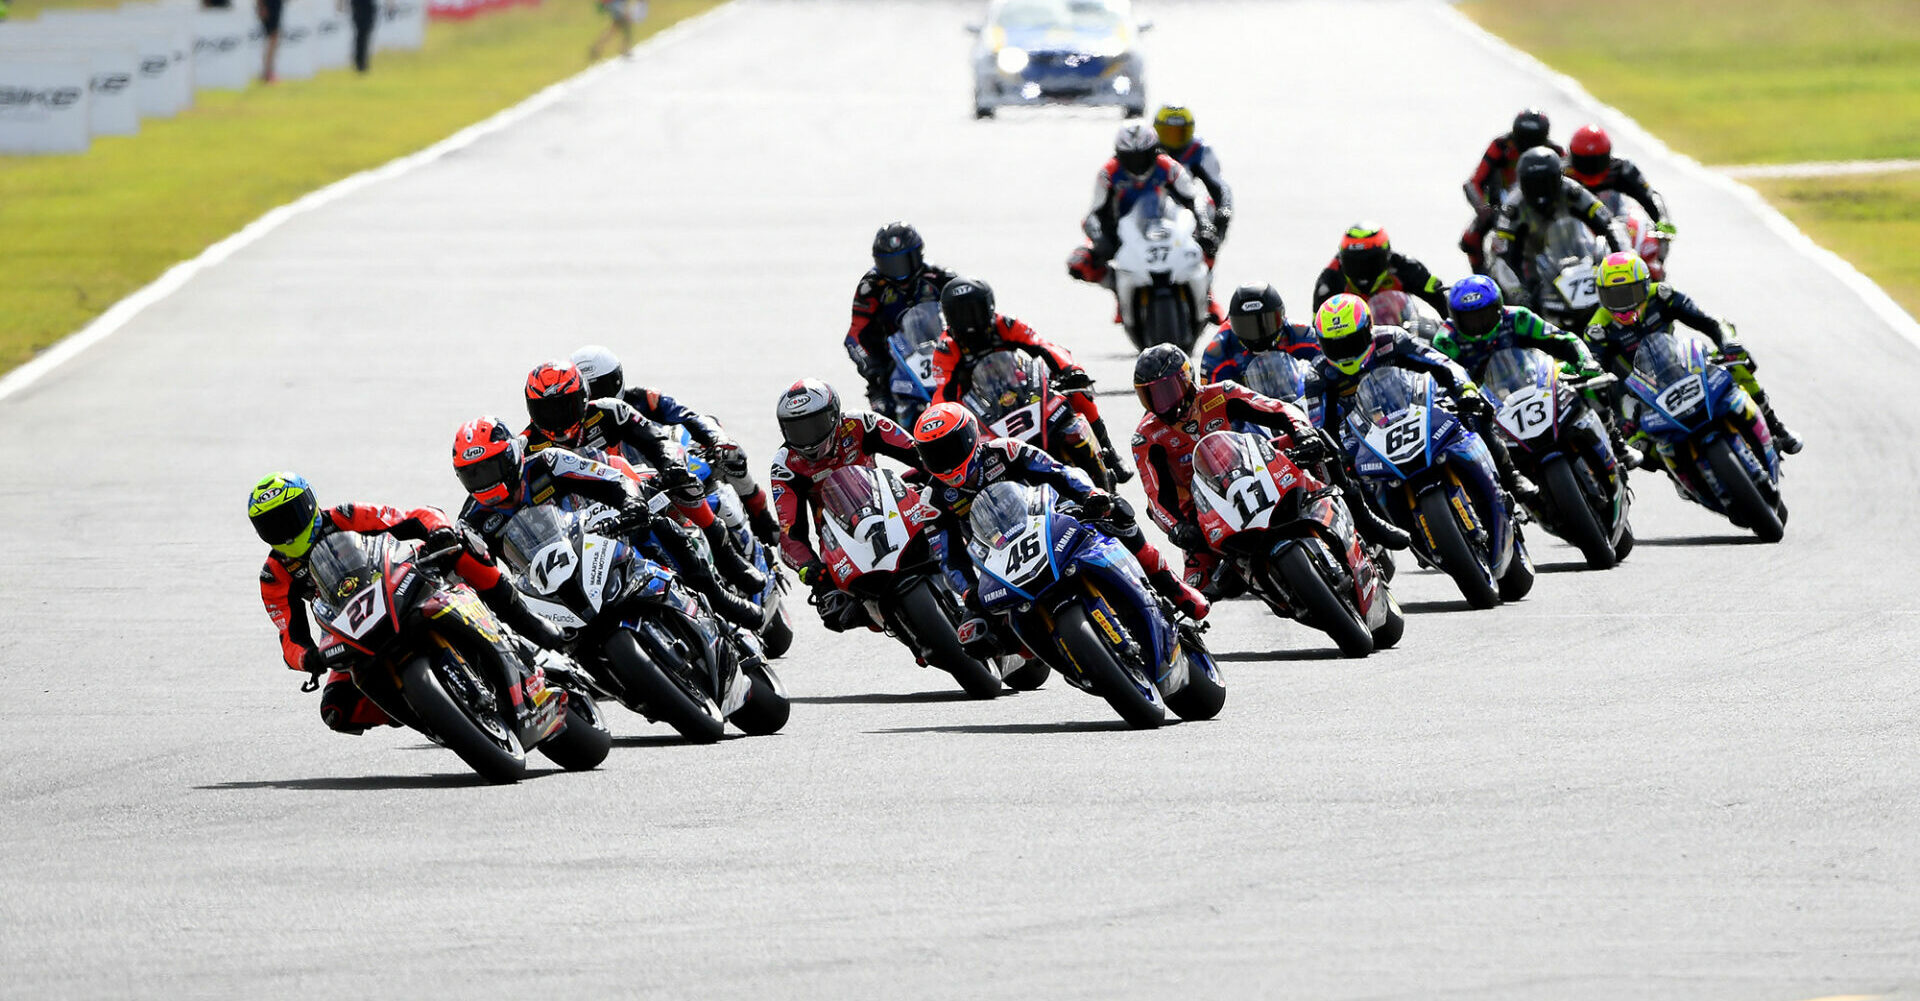 Round Four of the mi-bike Motorcycle Insurance Australian Superbike Championship series is happening this weekend at Morgan Park Raceway. Photo courtesy ASBK.